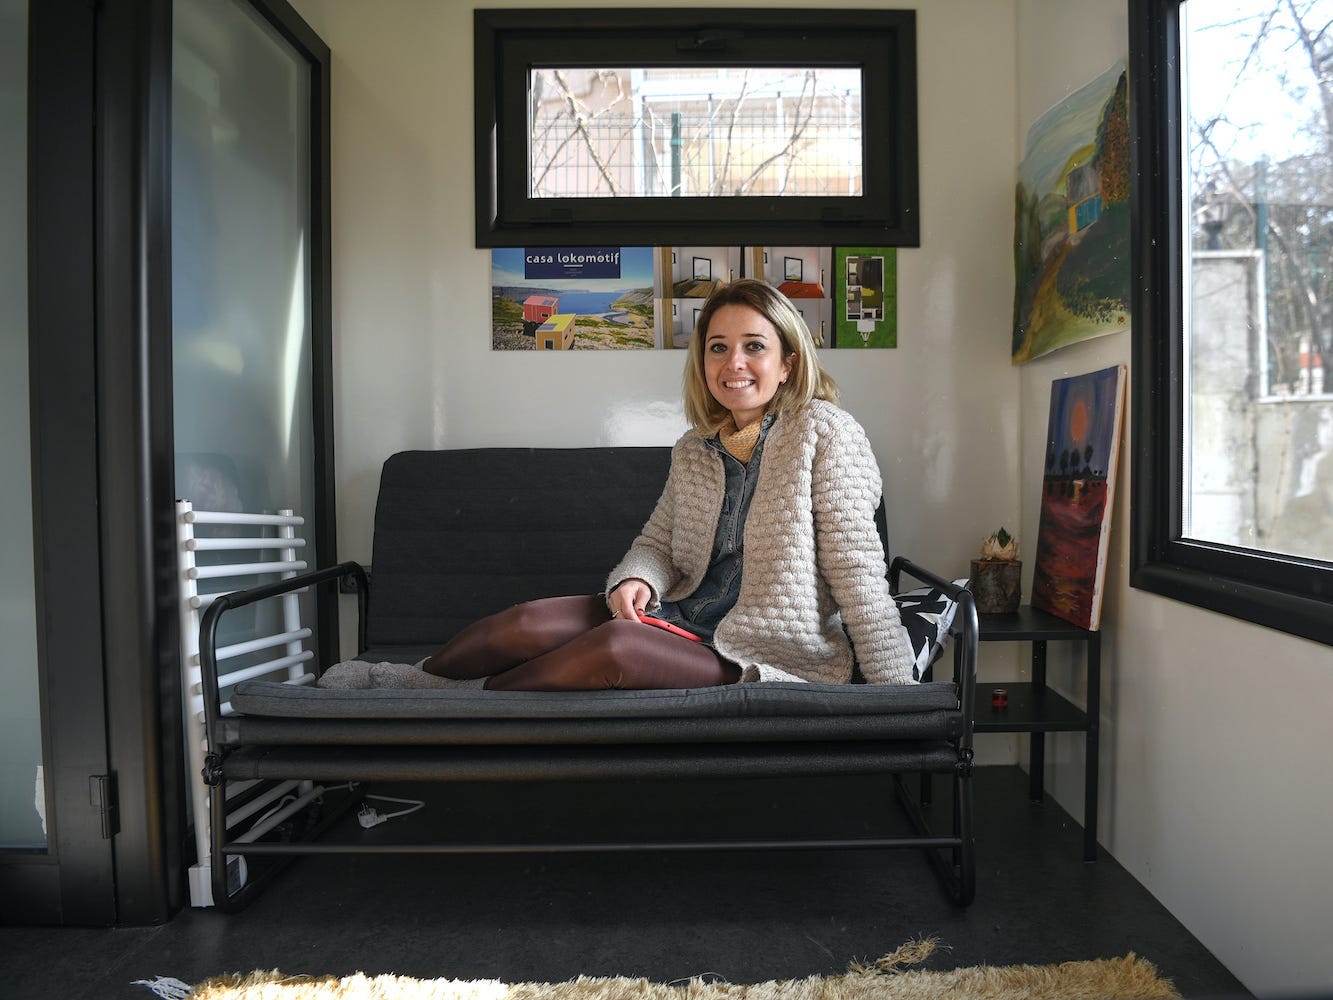 Pelin Dustegor, owner of the brand Casa Lokomotif, sits in a tiny house she designed.